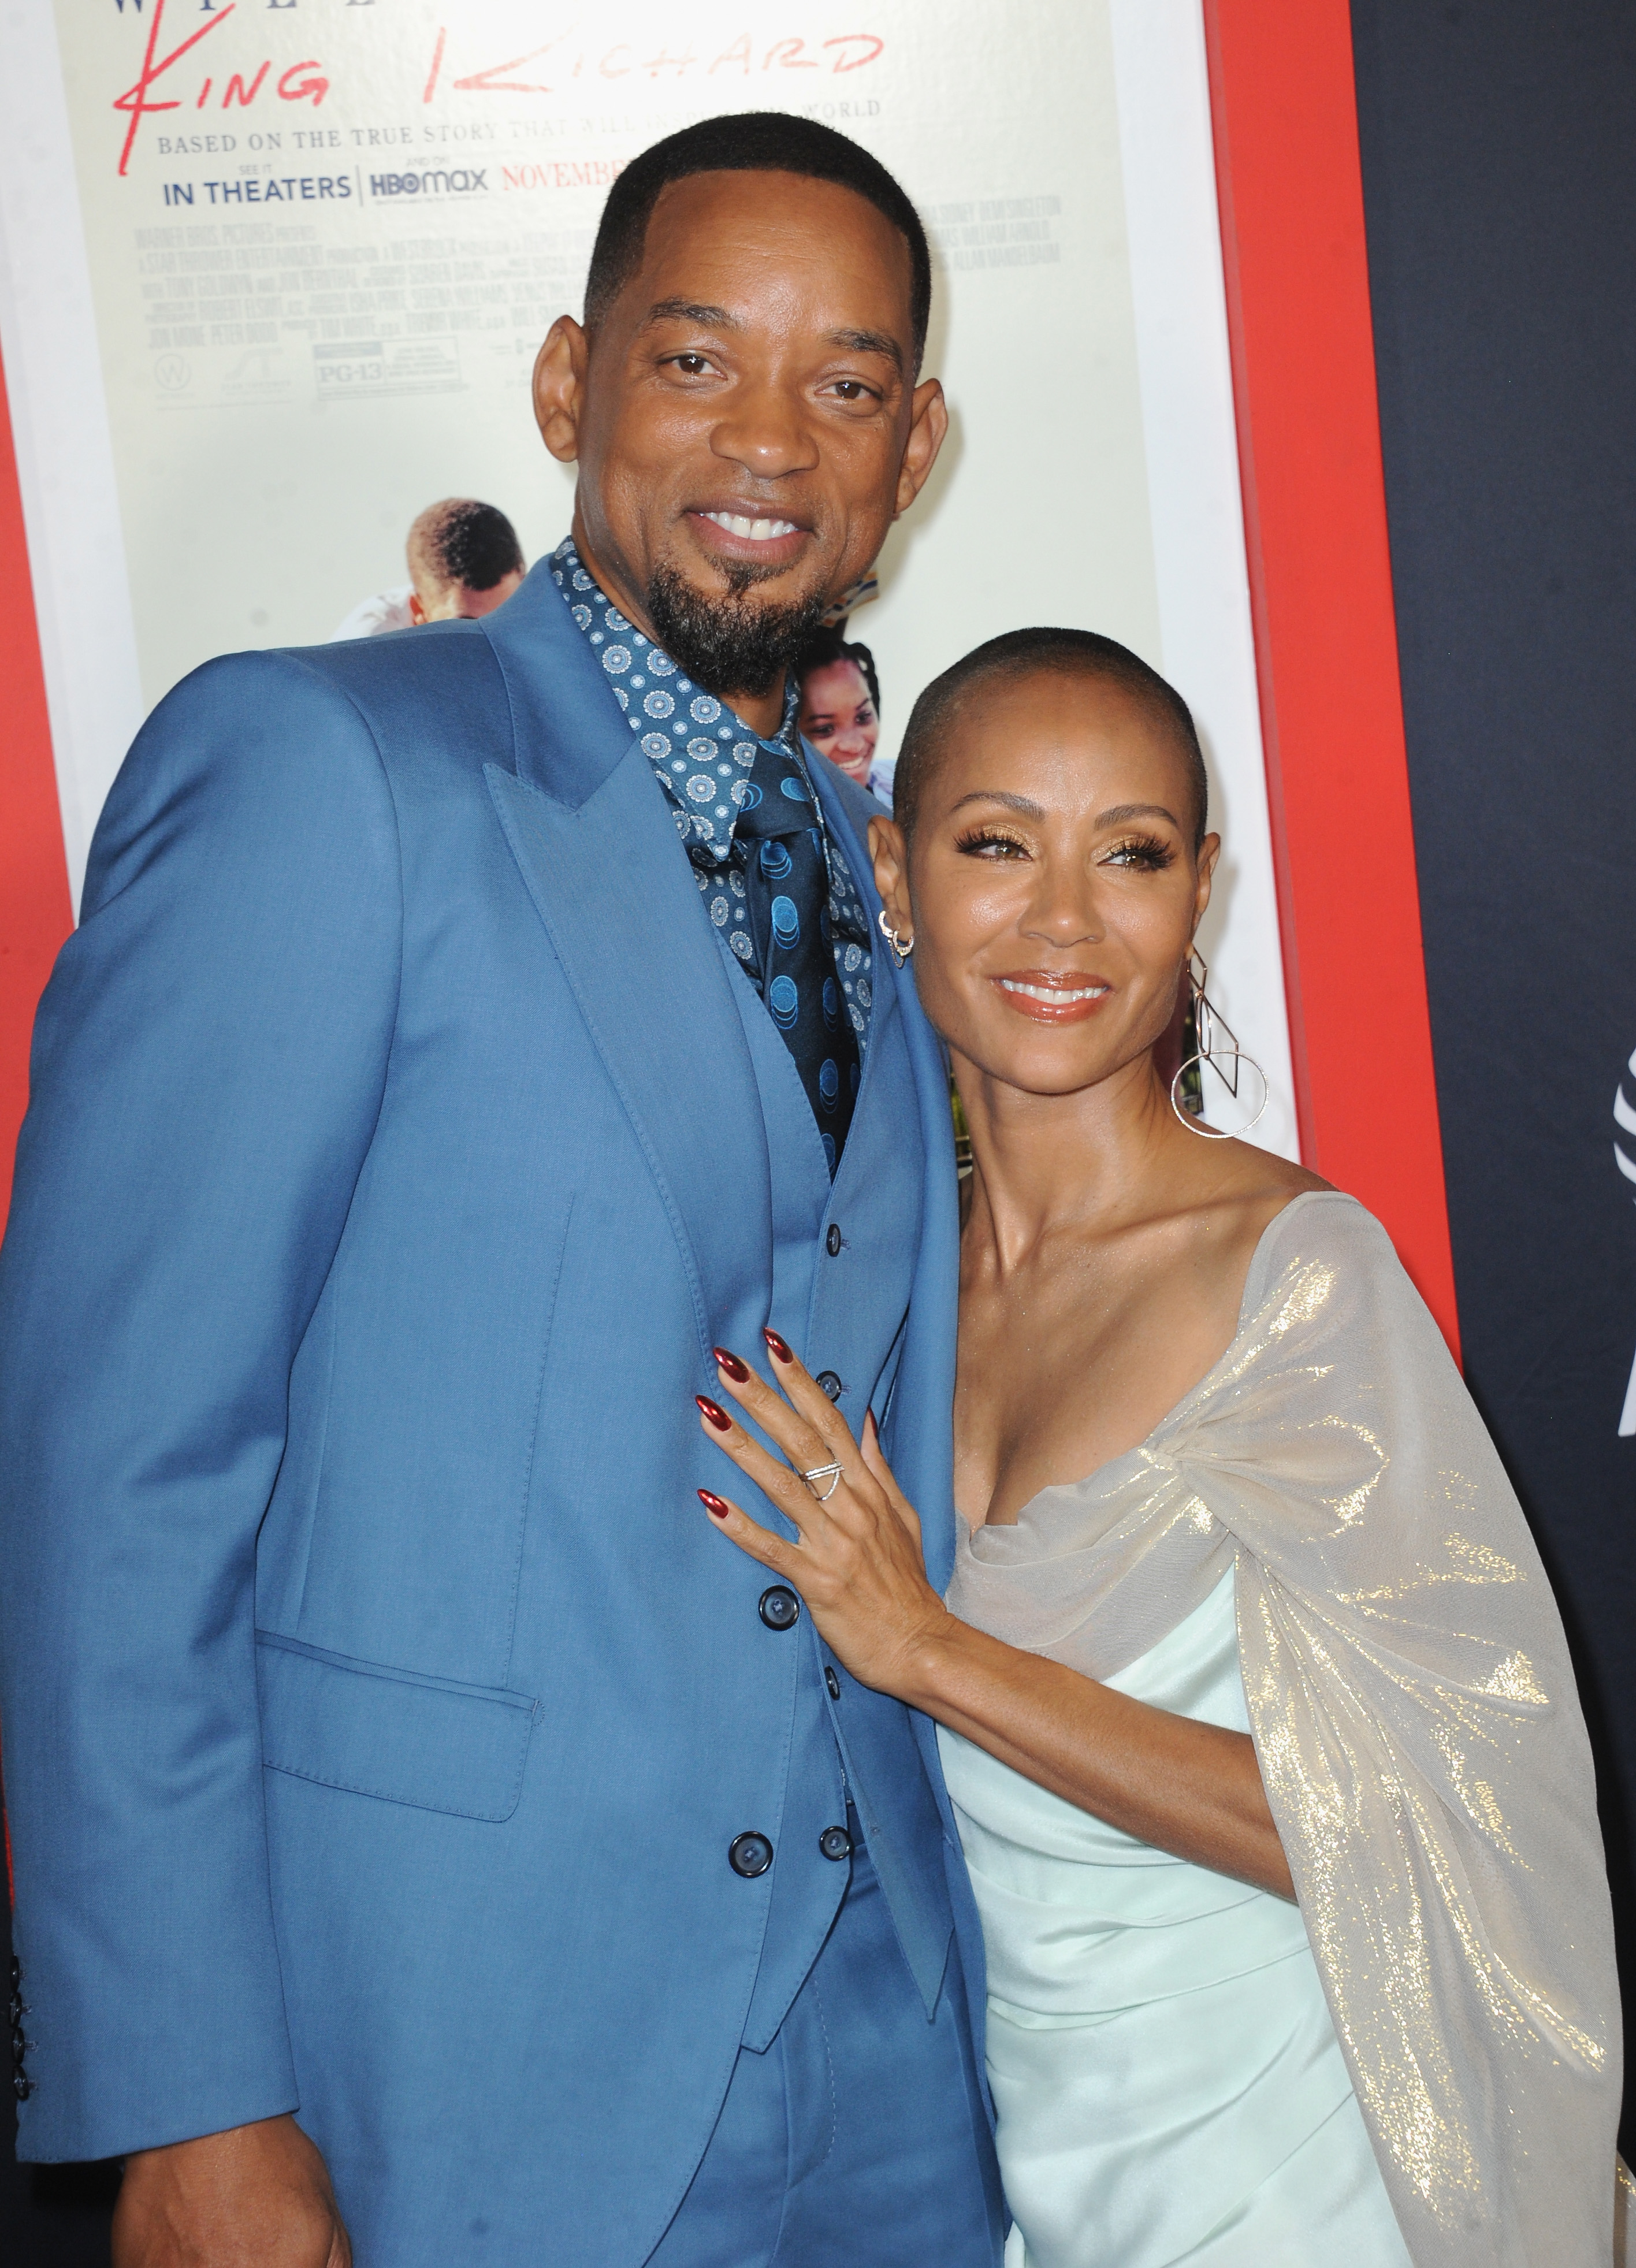 Close-up of Will and Jada smiling at a media event for King Richard